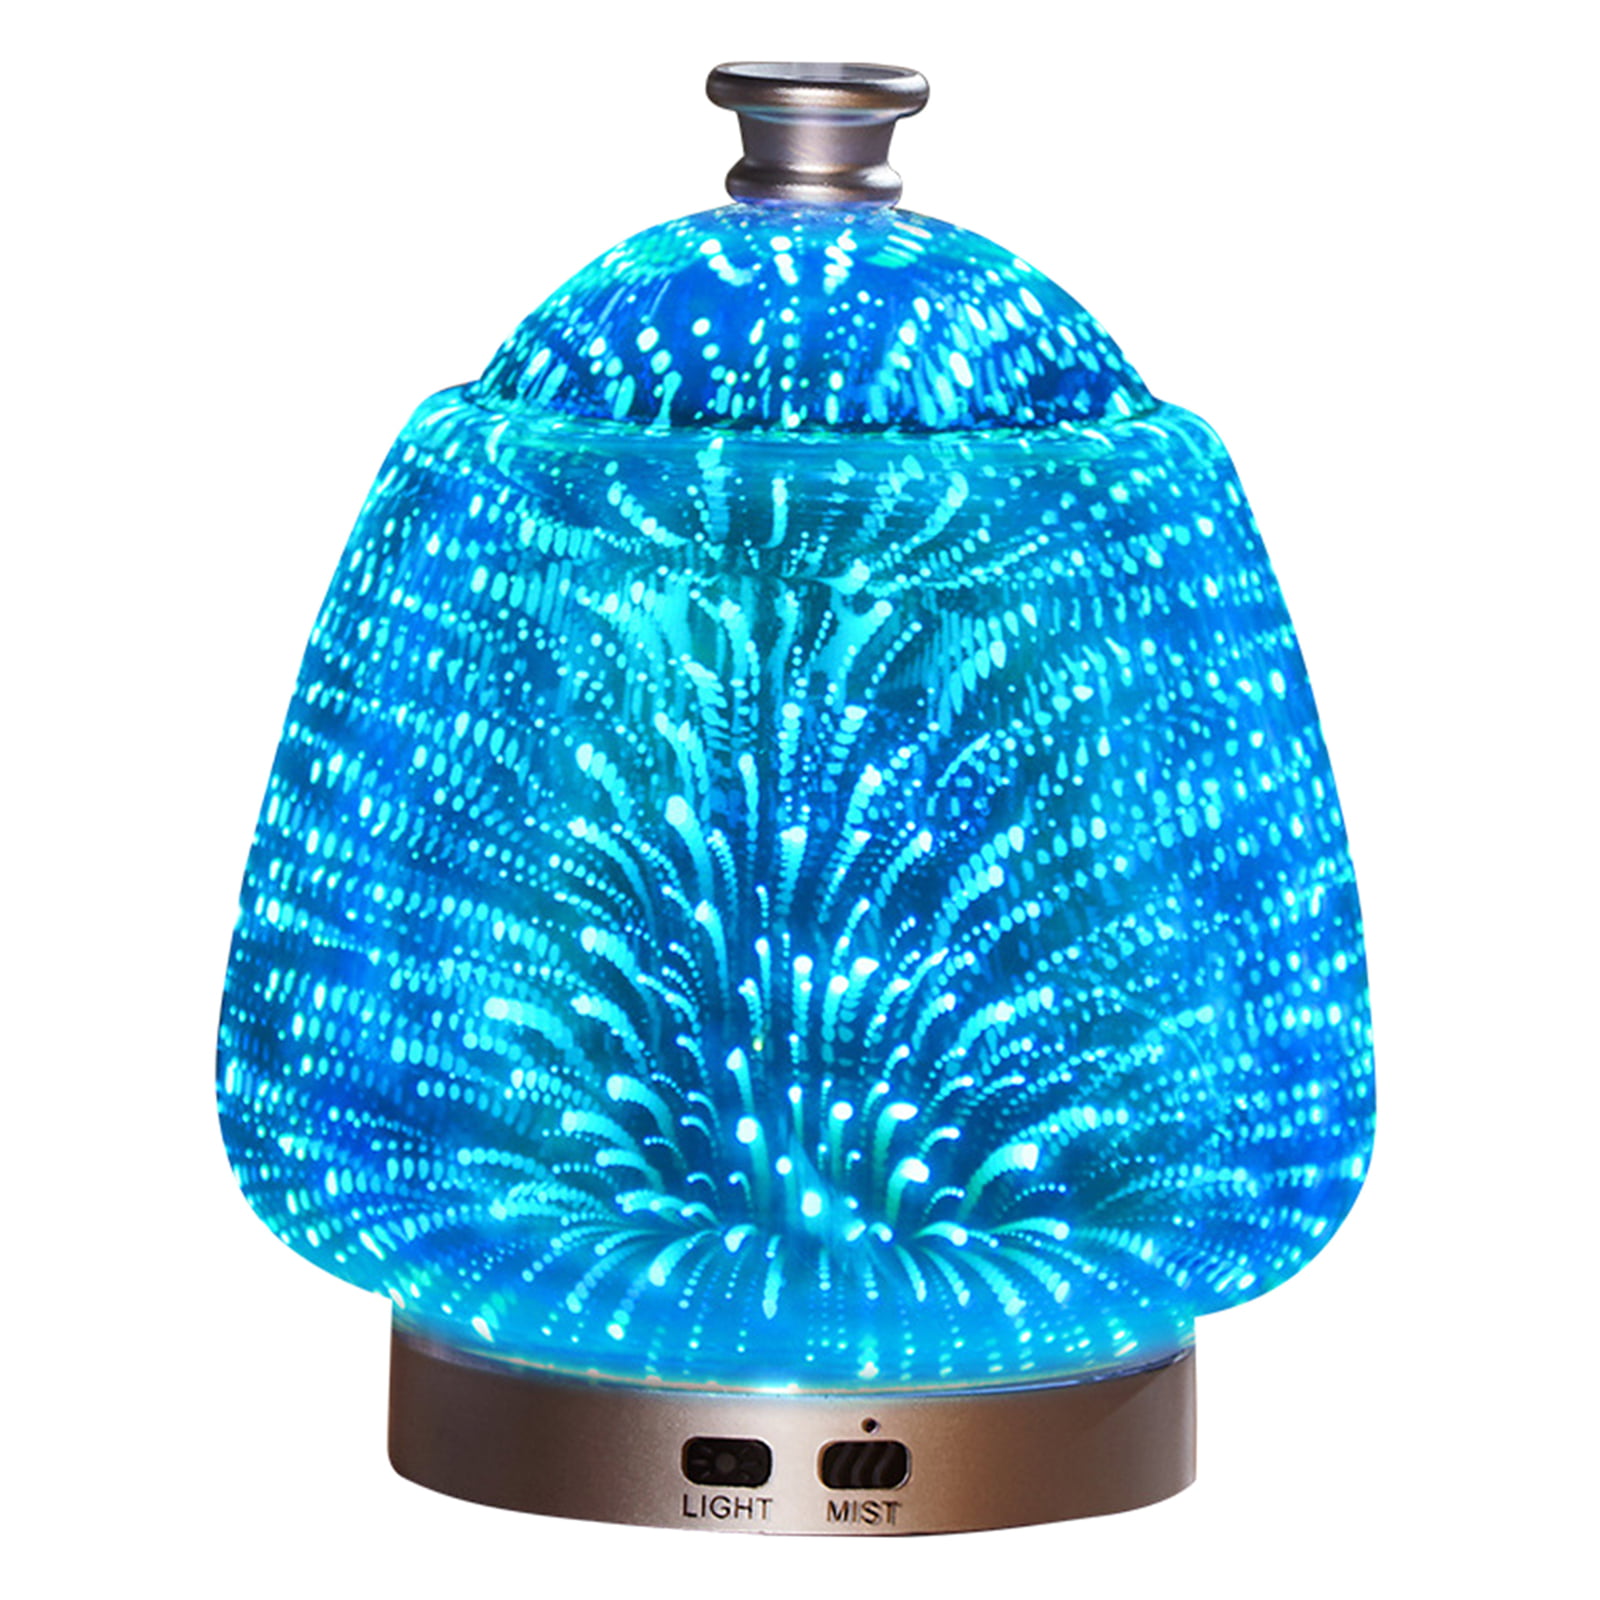 Details about   USA Essential Oil Ultrasonic Aroma Aromatherapy Diffuser Air Humidifier Purifier 